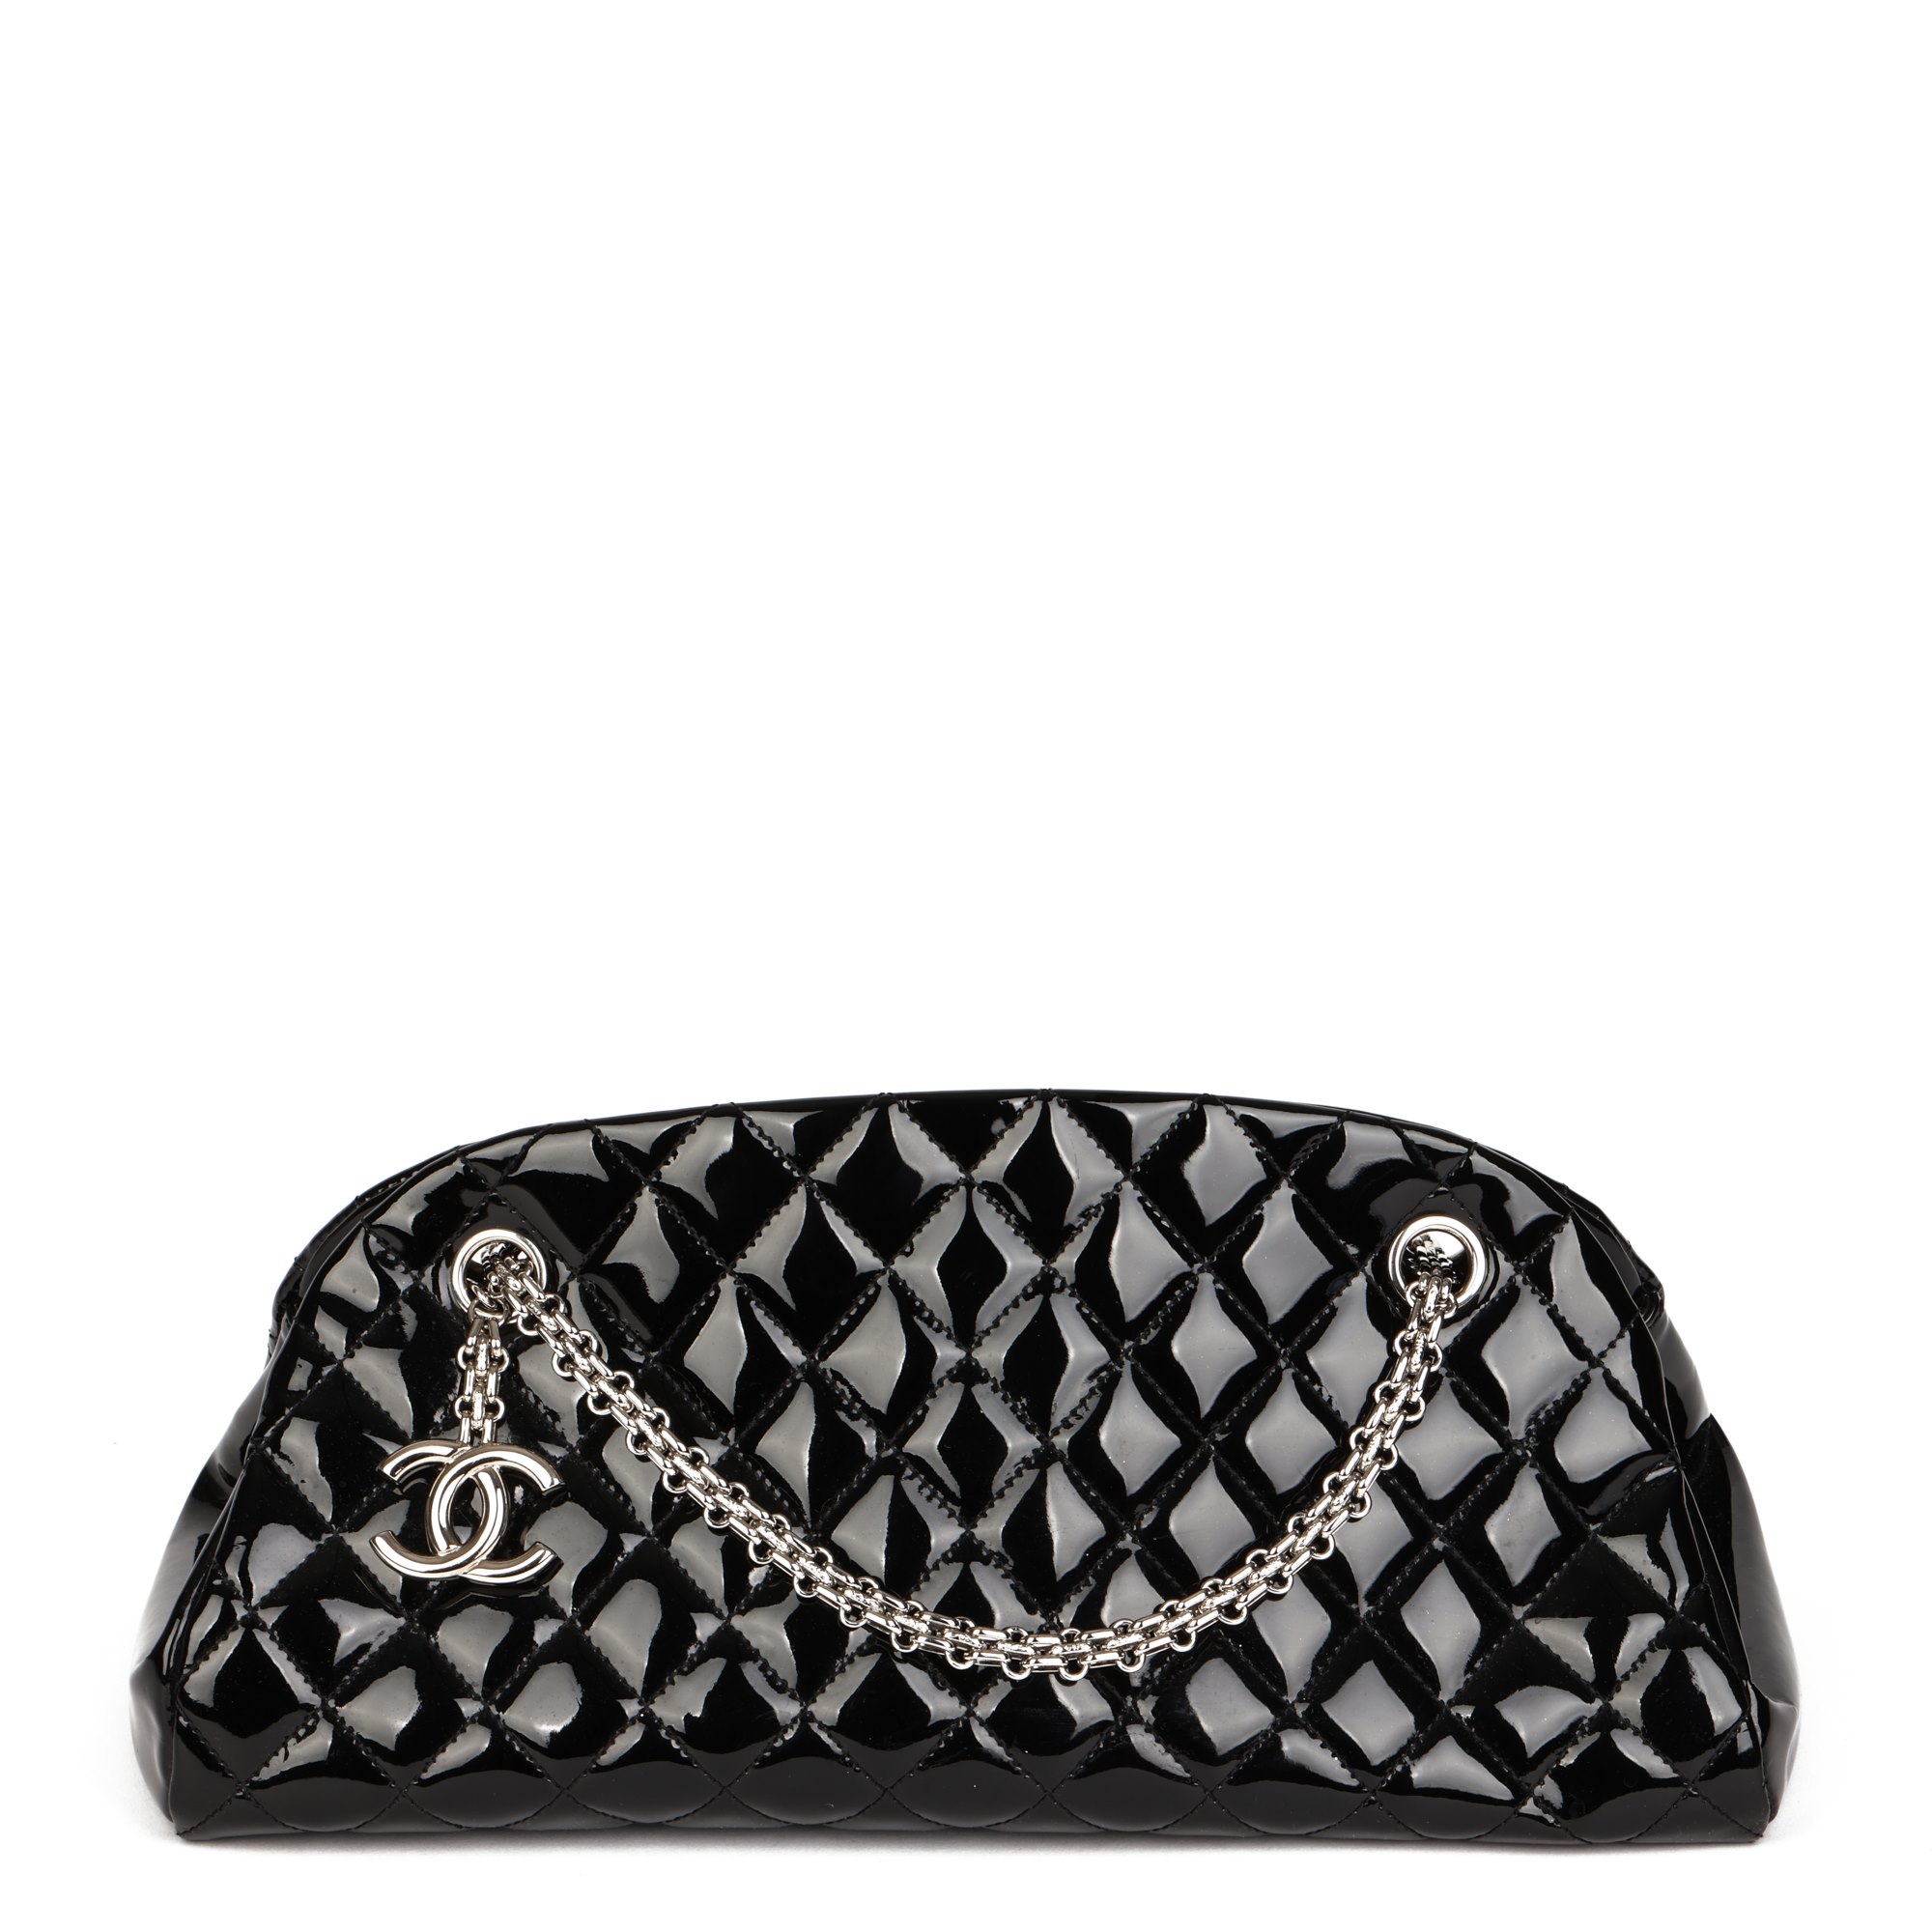 Chanel Just Mademoiselle Bowling Bag 2013 HB4062 | Second Hand Handbags